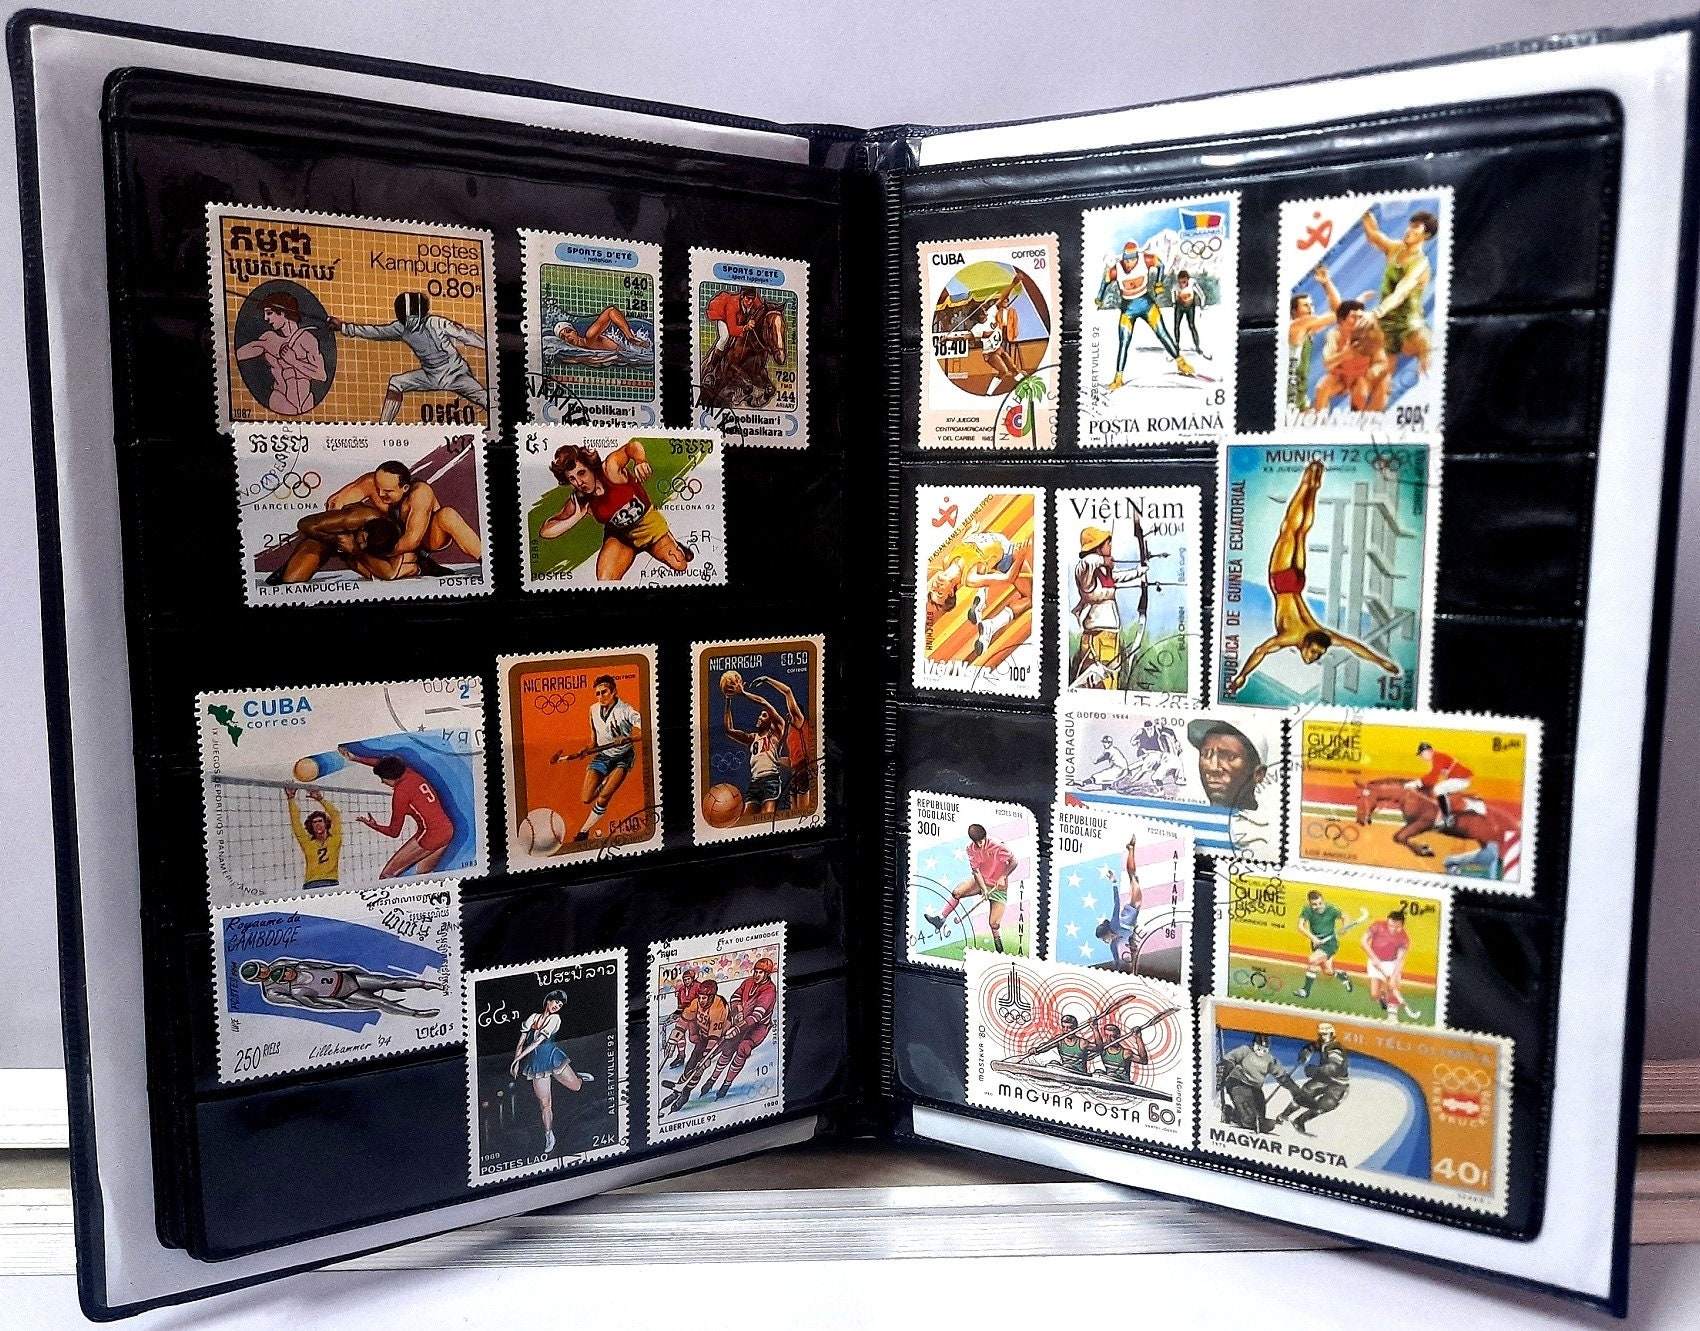 GOLD MINT Stamp Album stock book 20 pages with 500 world stamps gift combo  set Stamp Album Price in India - Buy GOLD MINT Stamp Album stock book 20  pages with 500